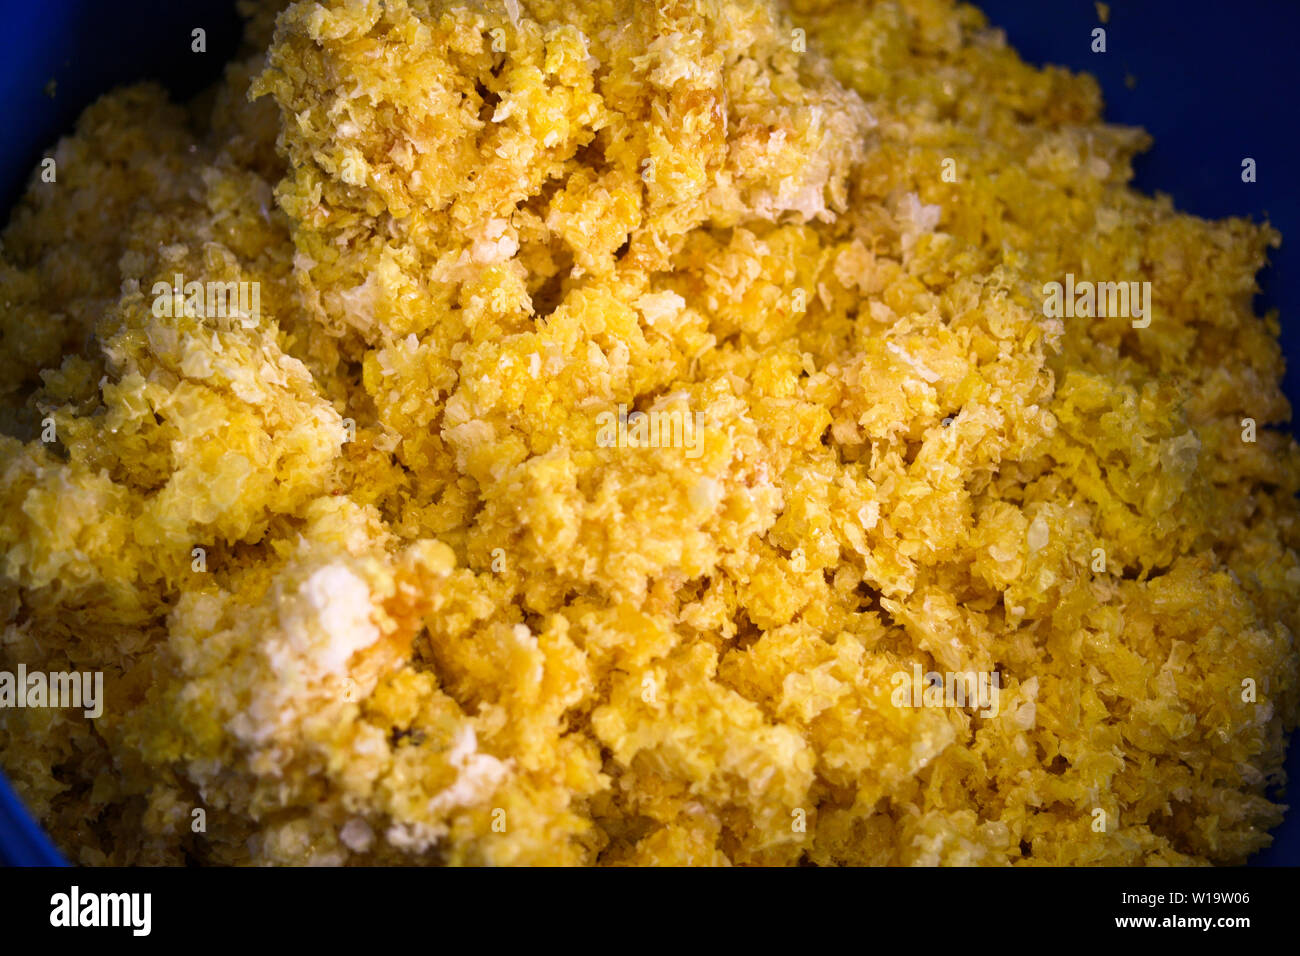 BEESWAX to be taken care of Stock Photo